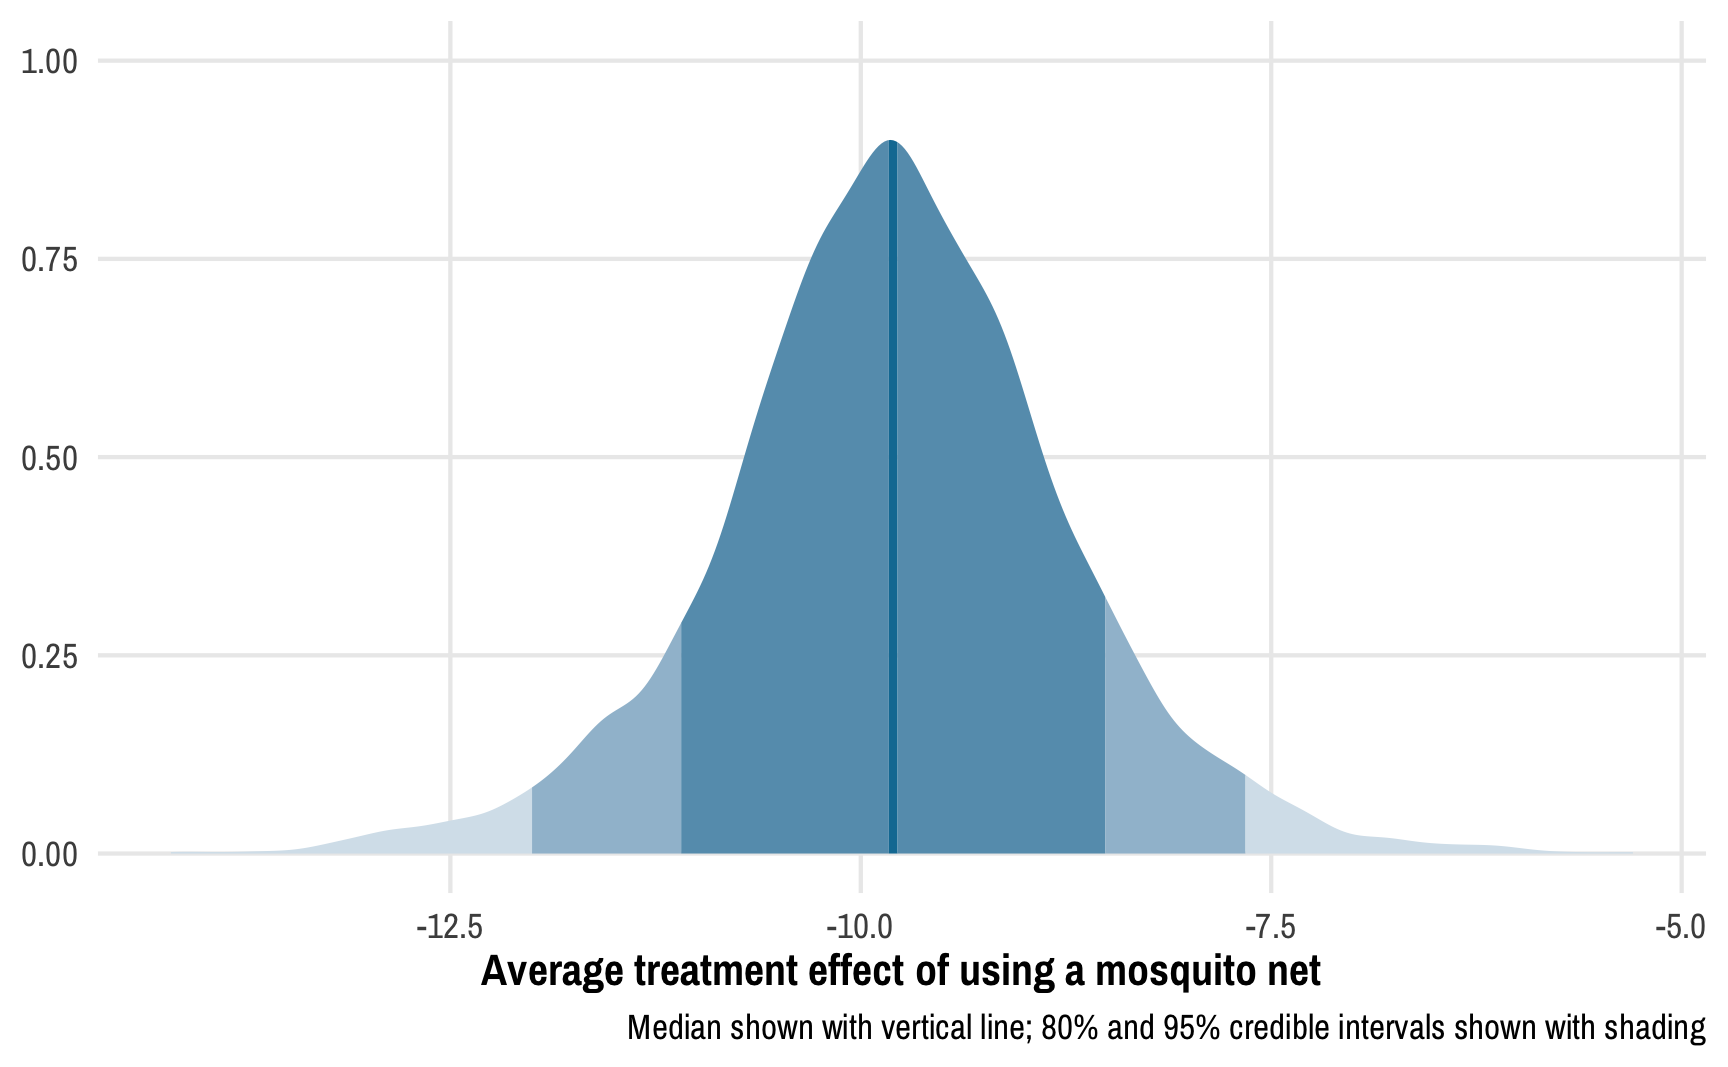 How to create a(n almost) fully Bayesian outcome model with inverse probability weights